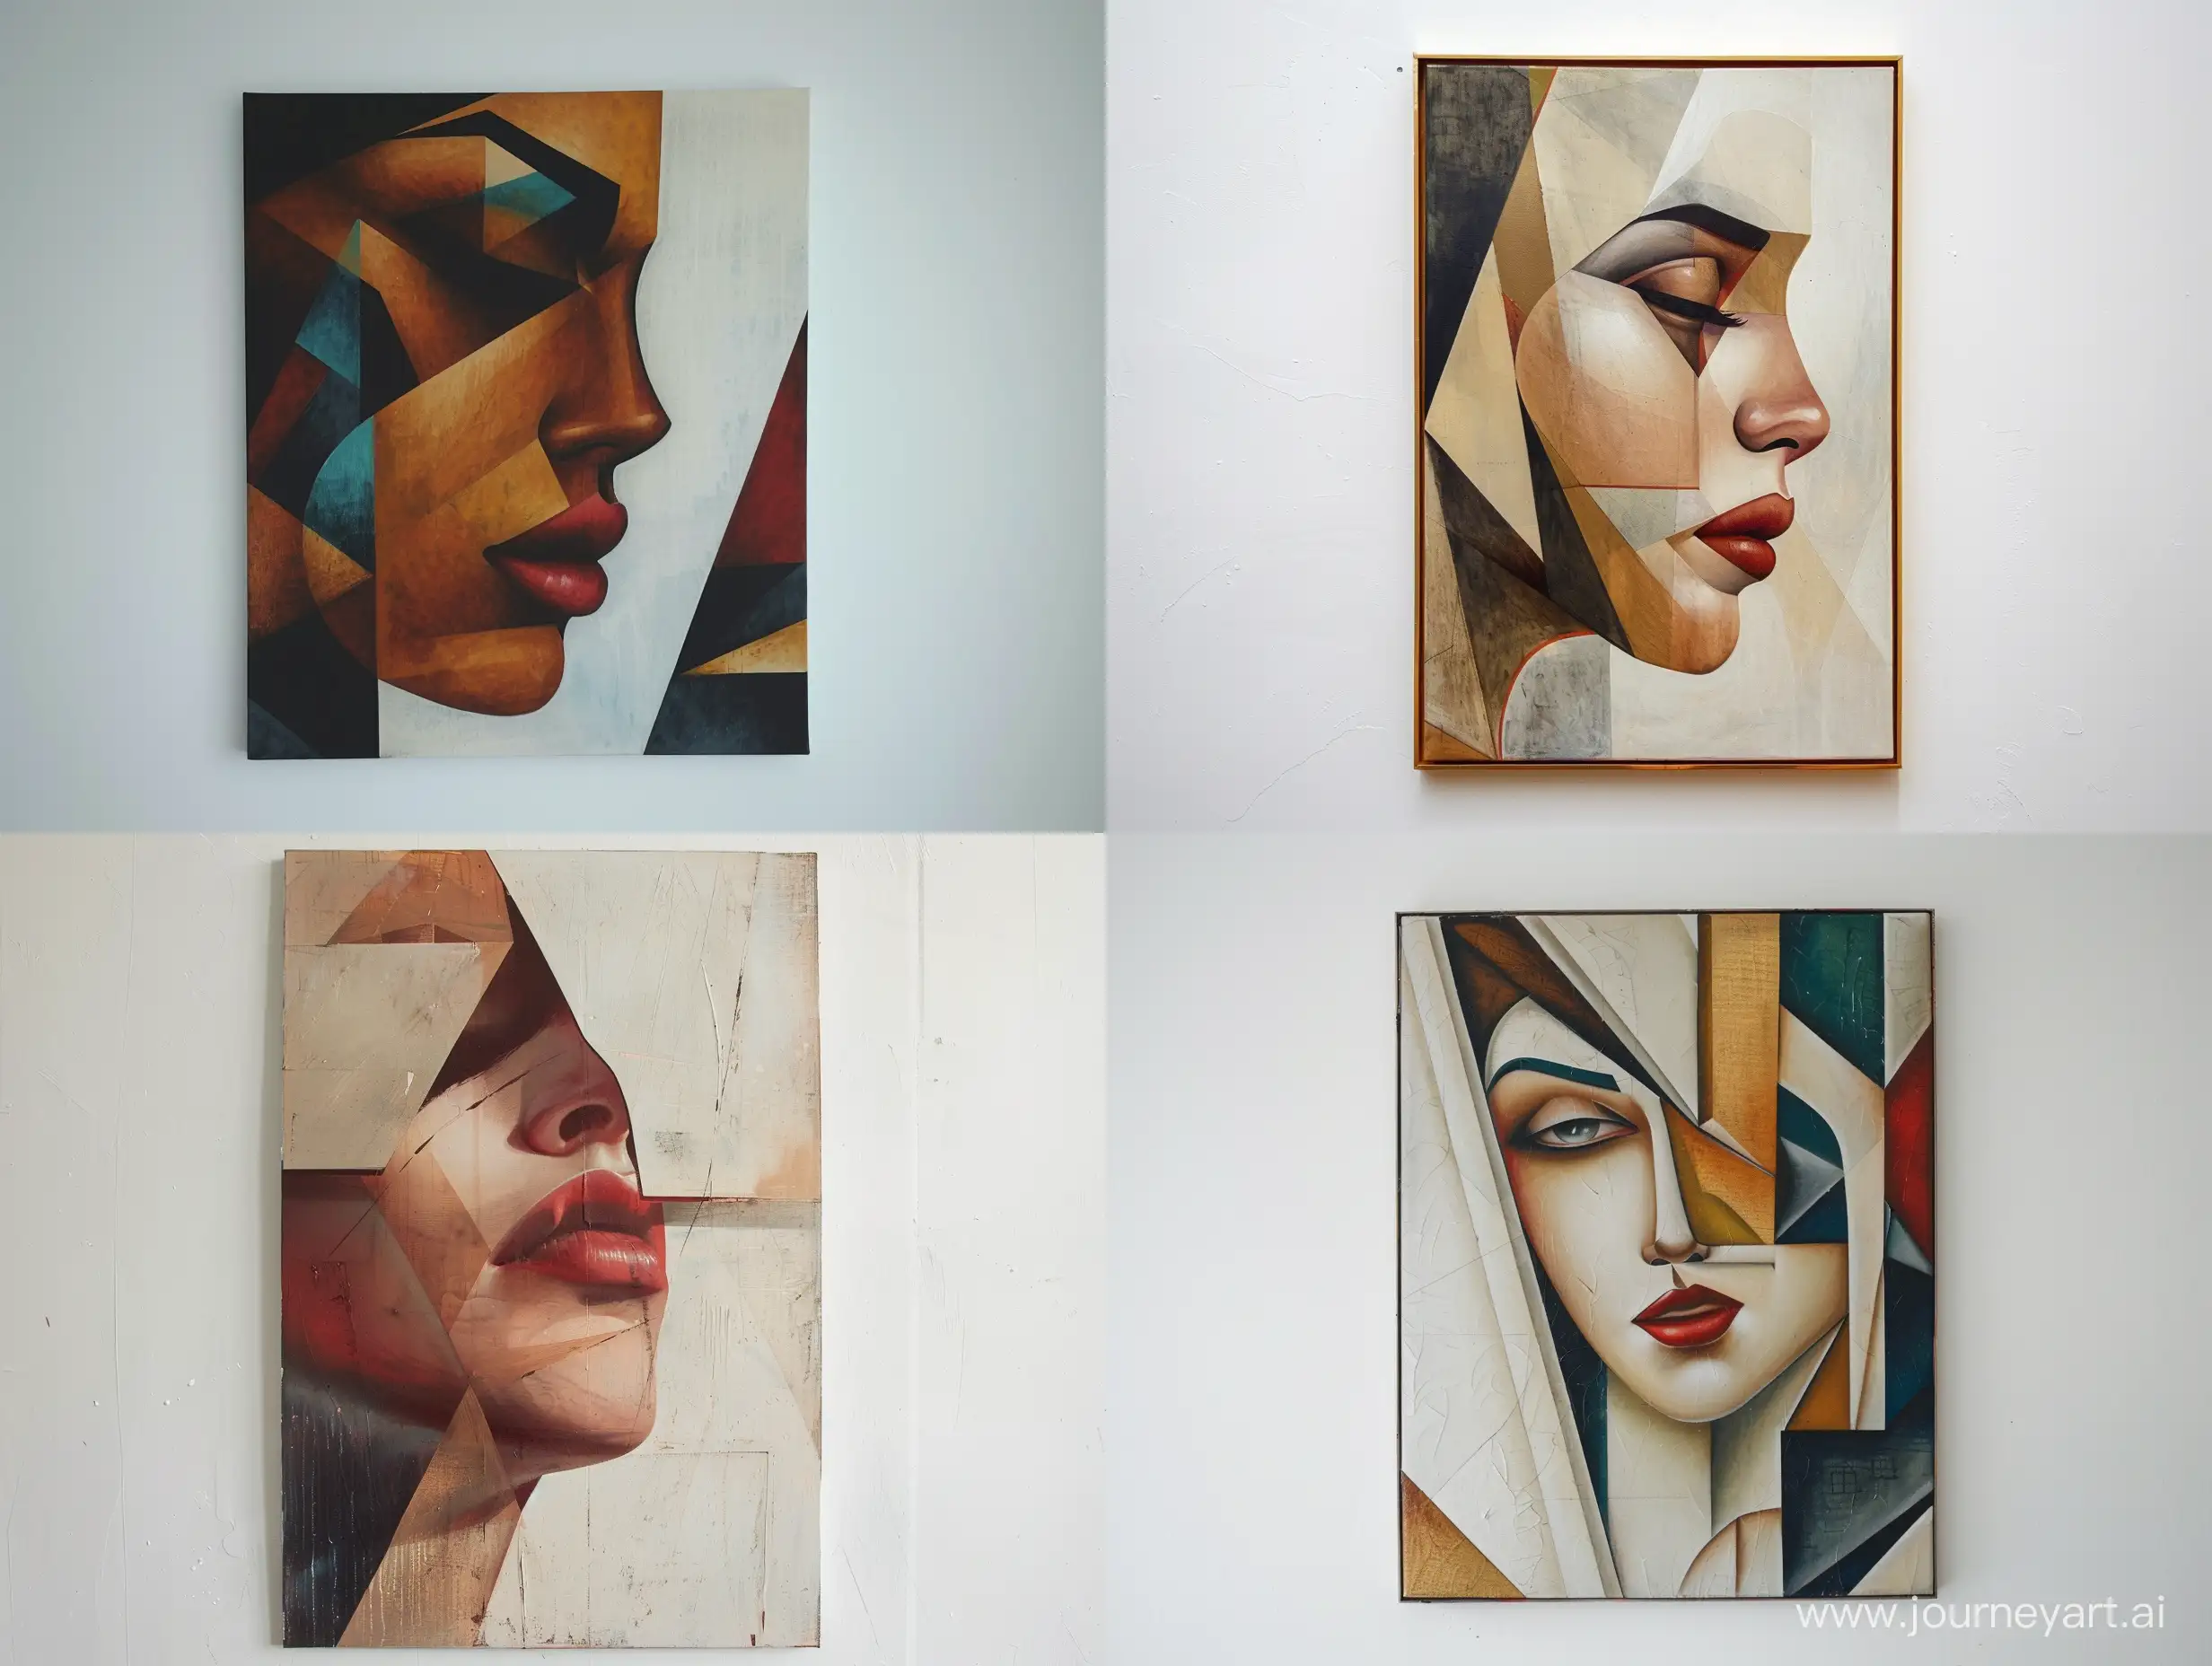 a painting of a woman's face on a white wall, an art deco painting inspired by Luis Royo's art, Behance contest winner, geometric abstract art, art deco, angular, cubism --v 6 --ar 4:3 --no 81155